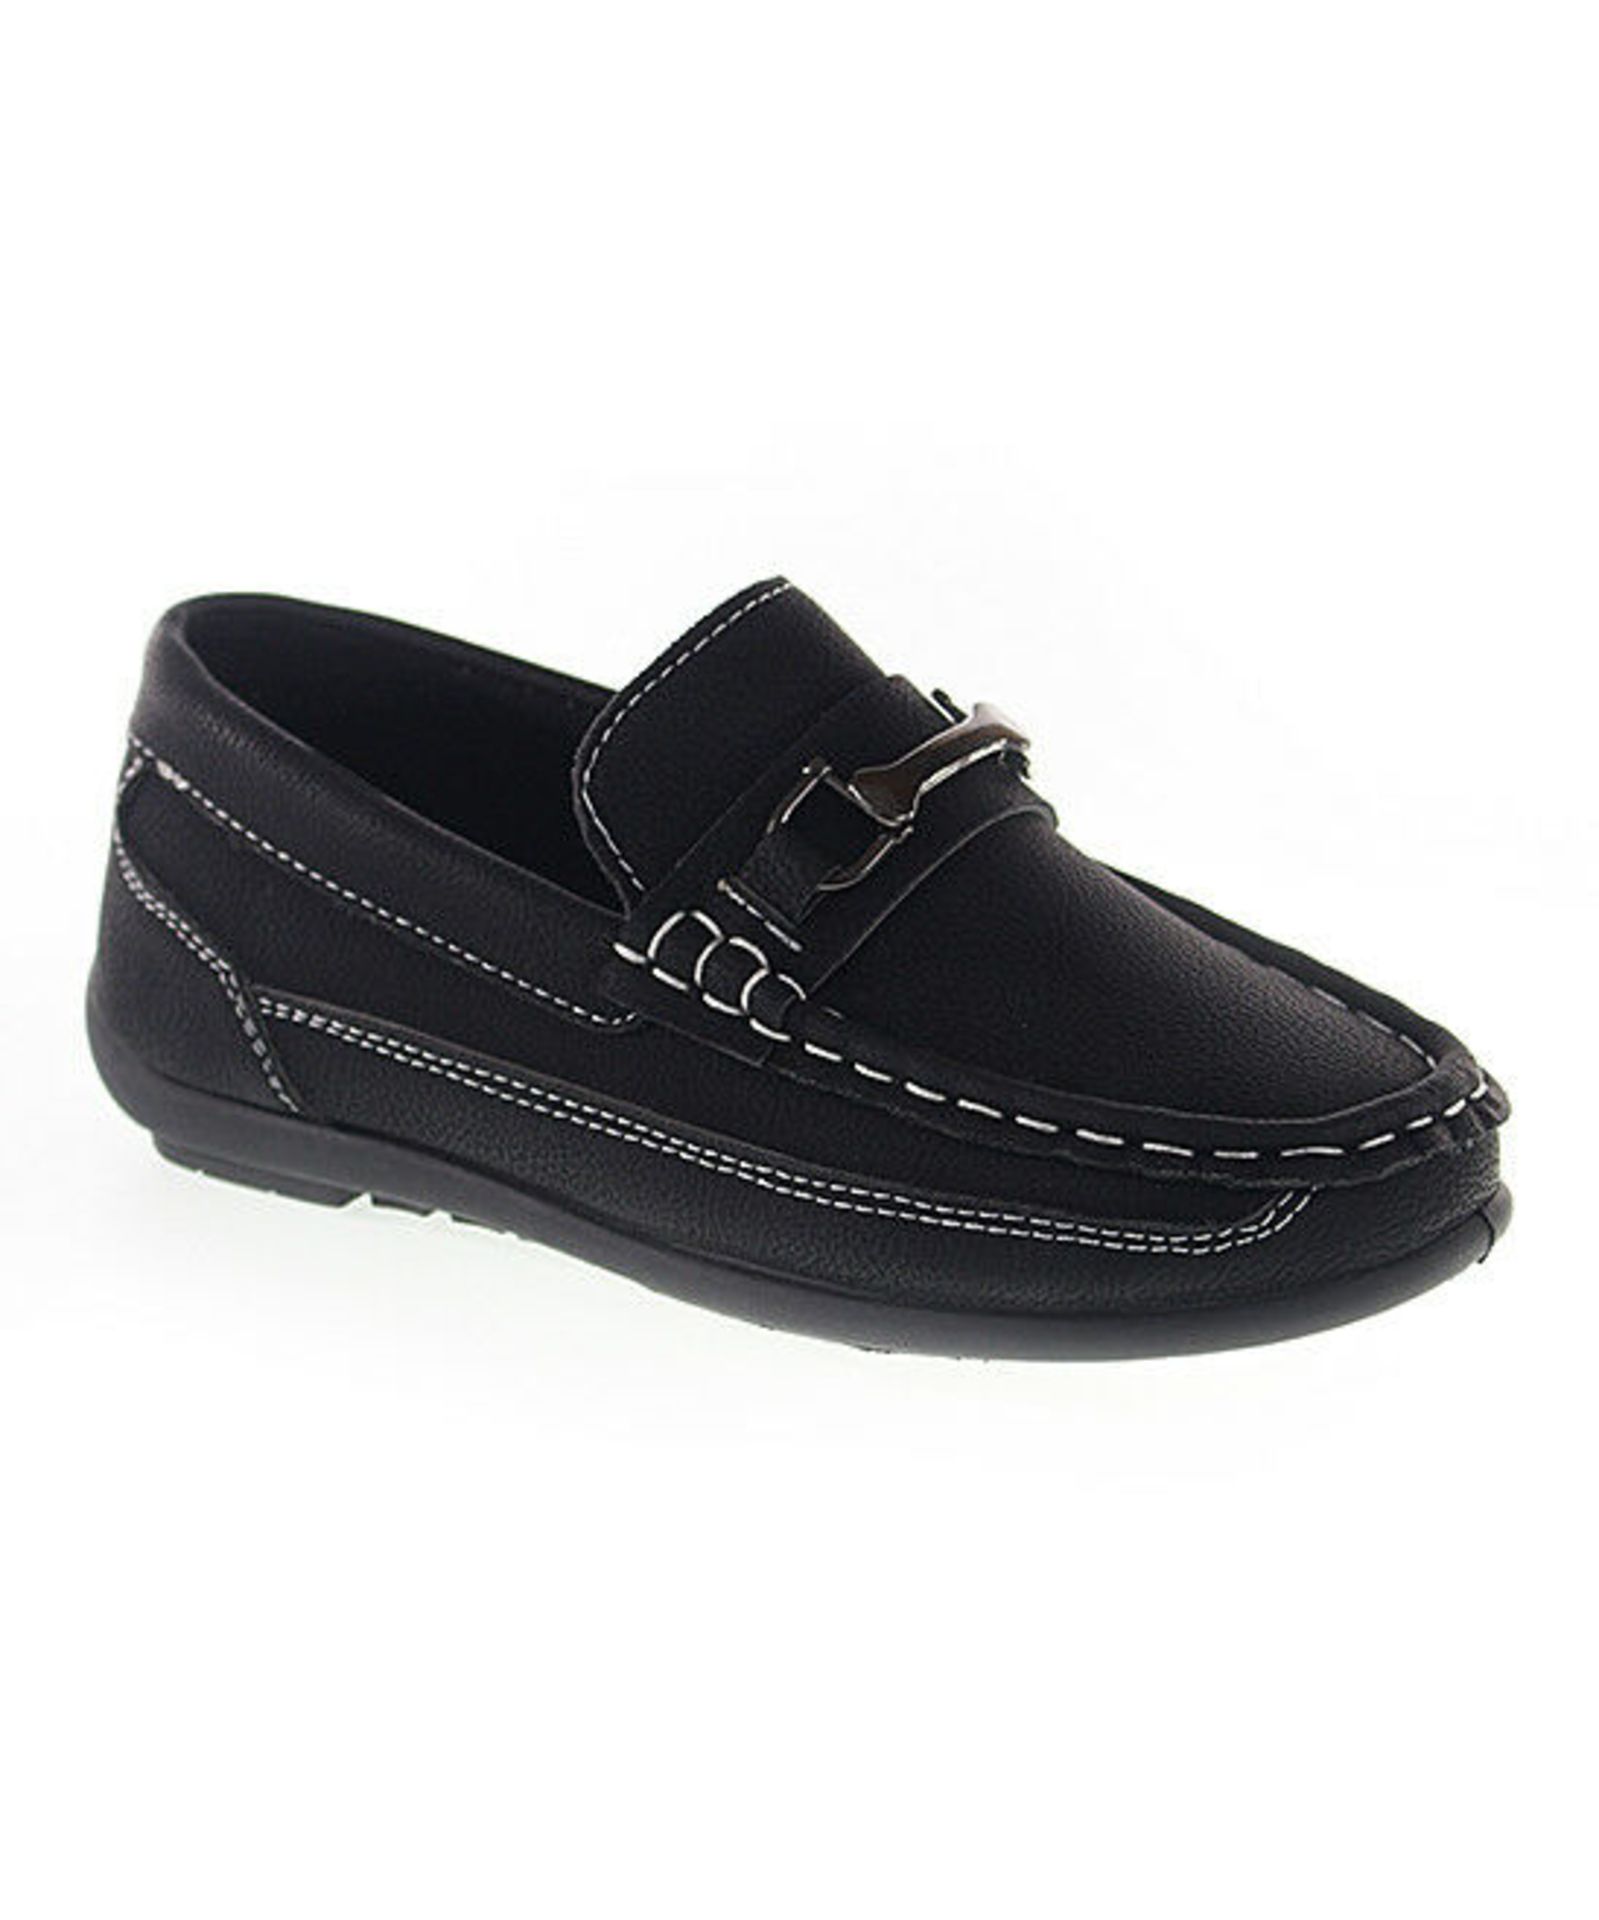 Josmo Black & Silver Bar Loafer (Uk Size:13/Us Size:1) (New With Box) [Ref: 699302643062-M-005]